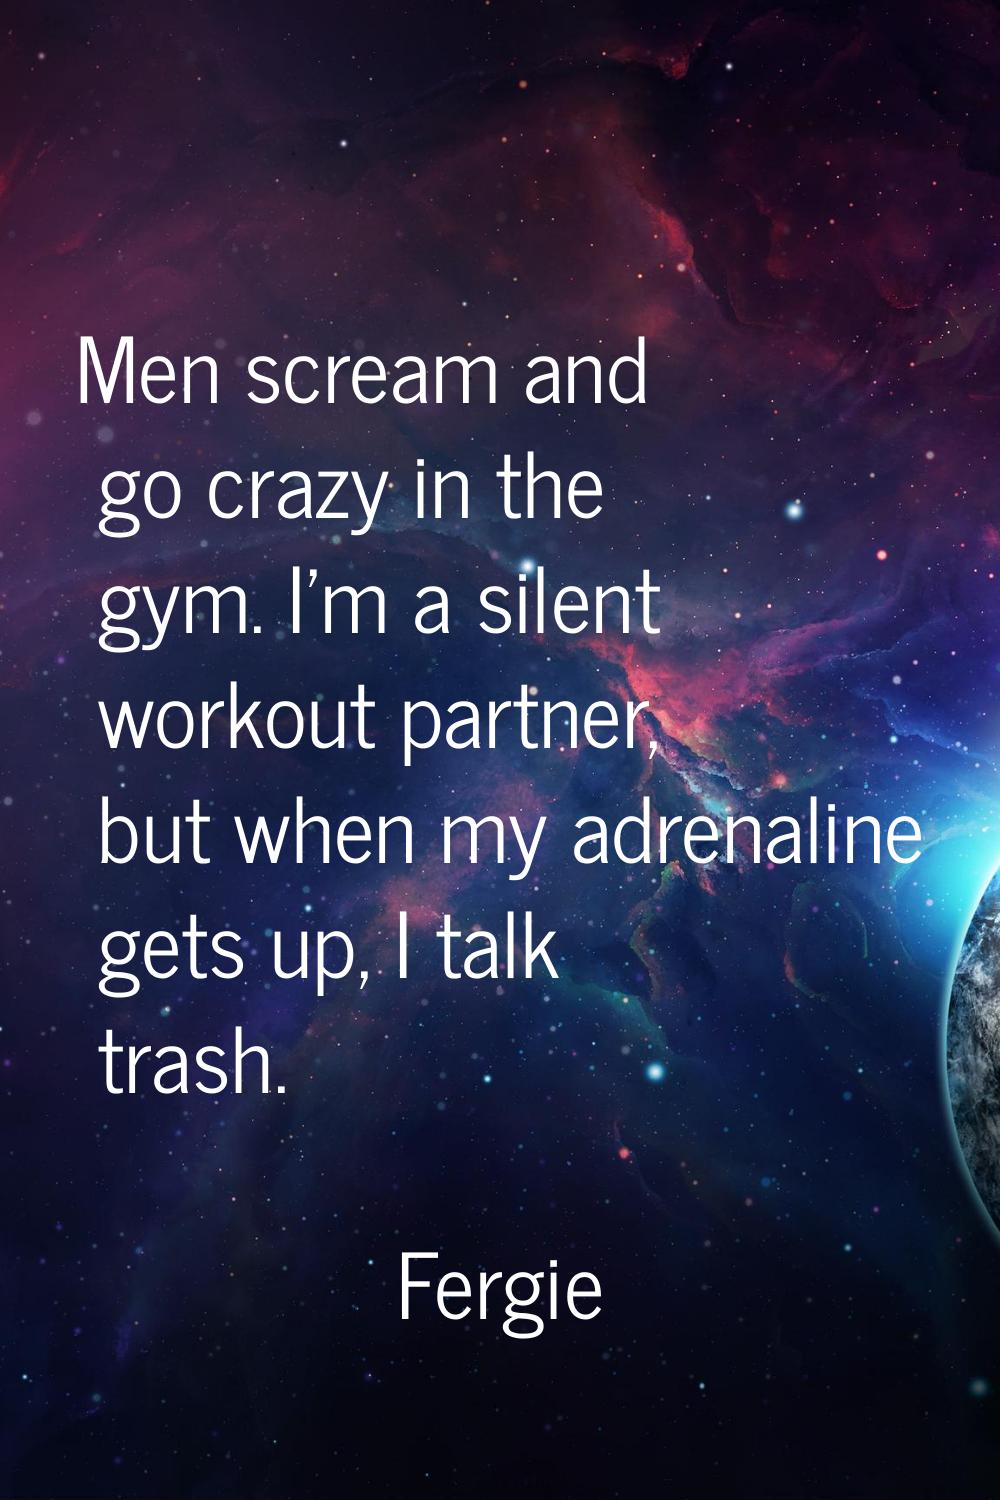 Men scream and go crazy in the gym. I'm a silent workout partner, but when my adrenaline gets up, I